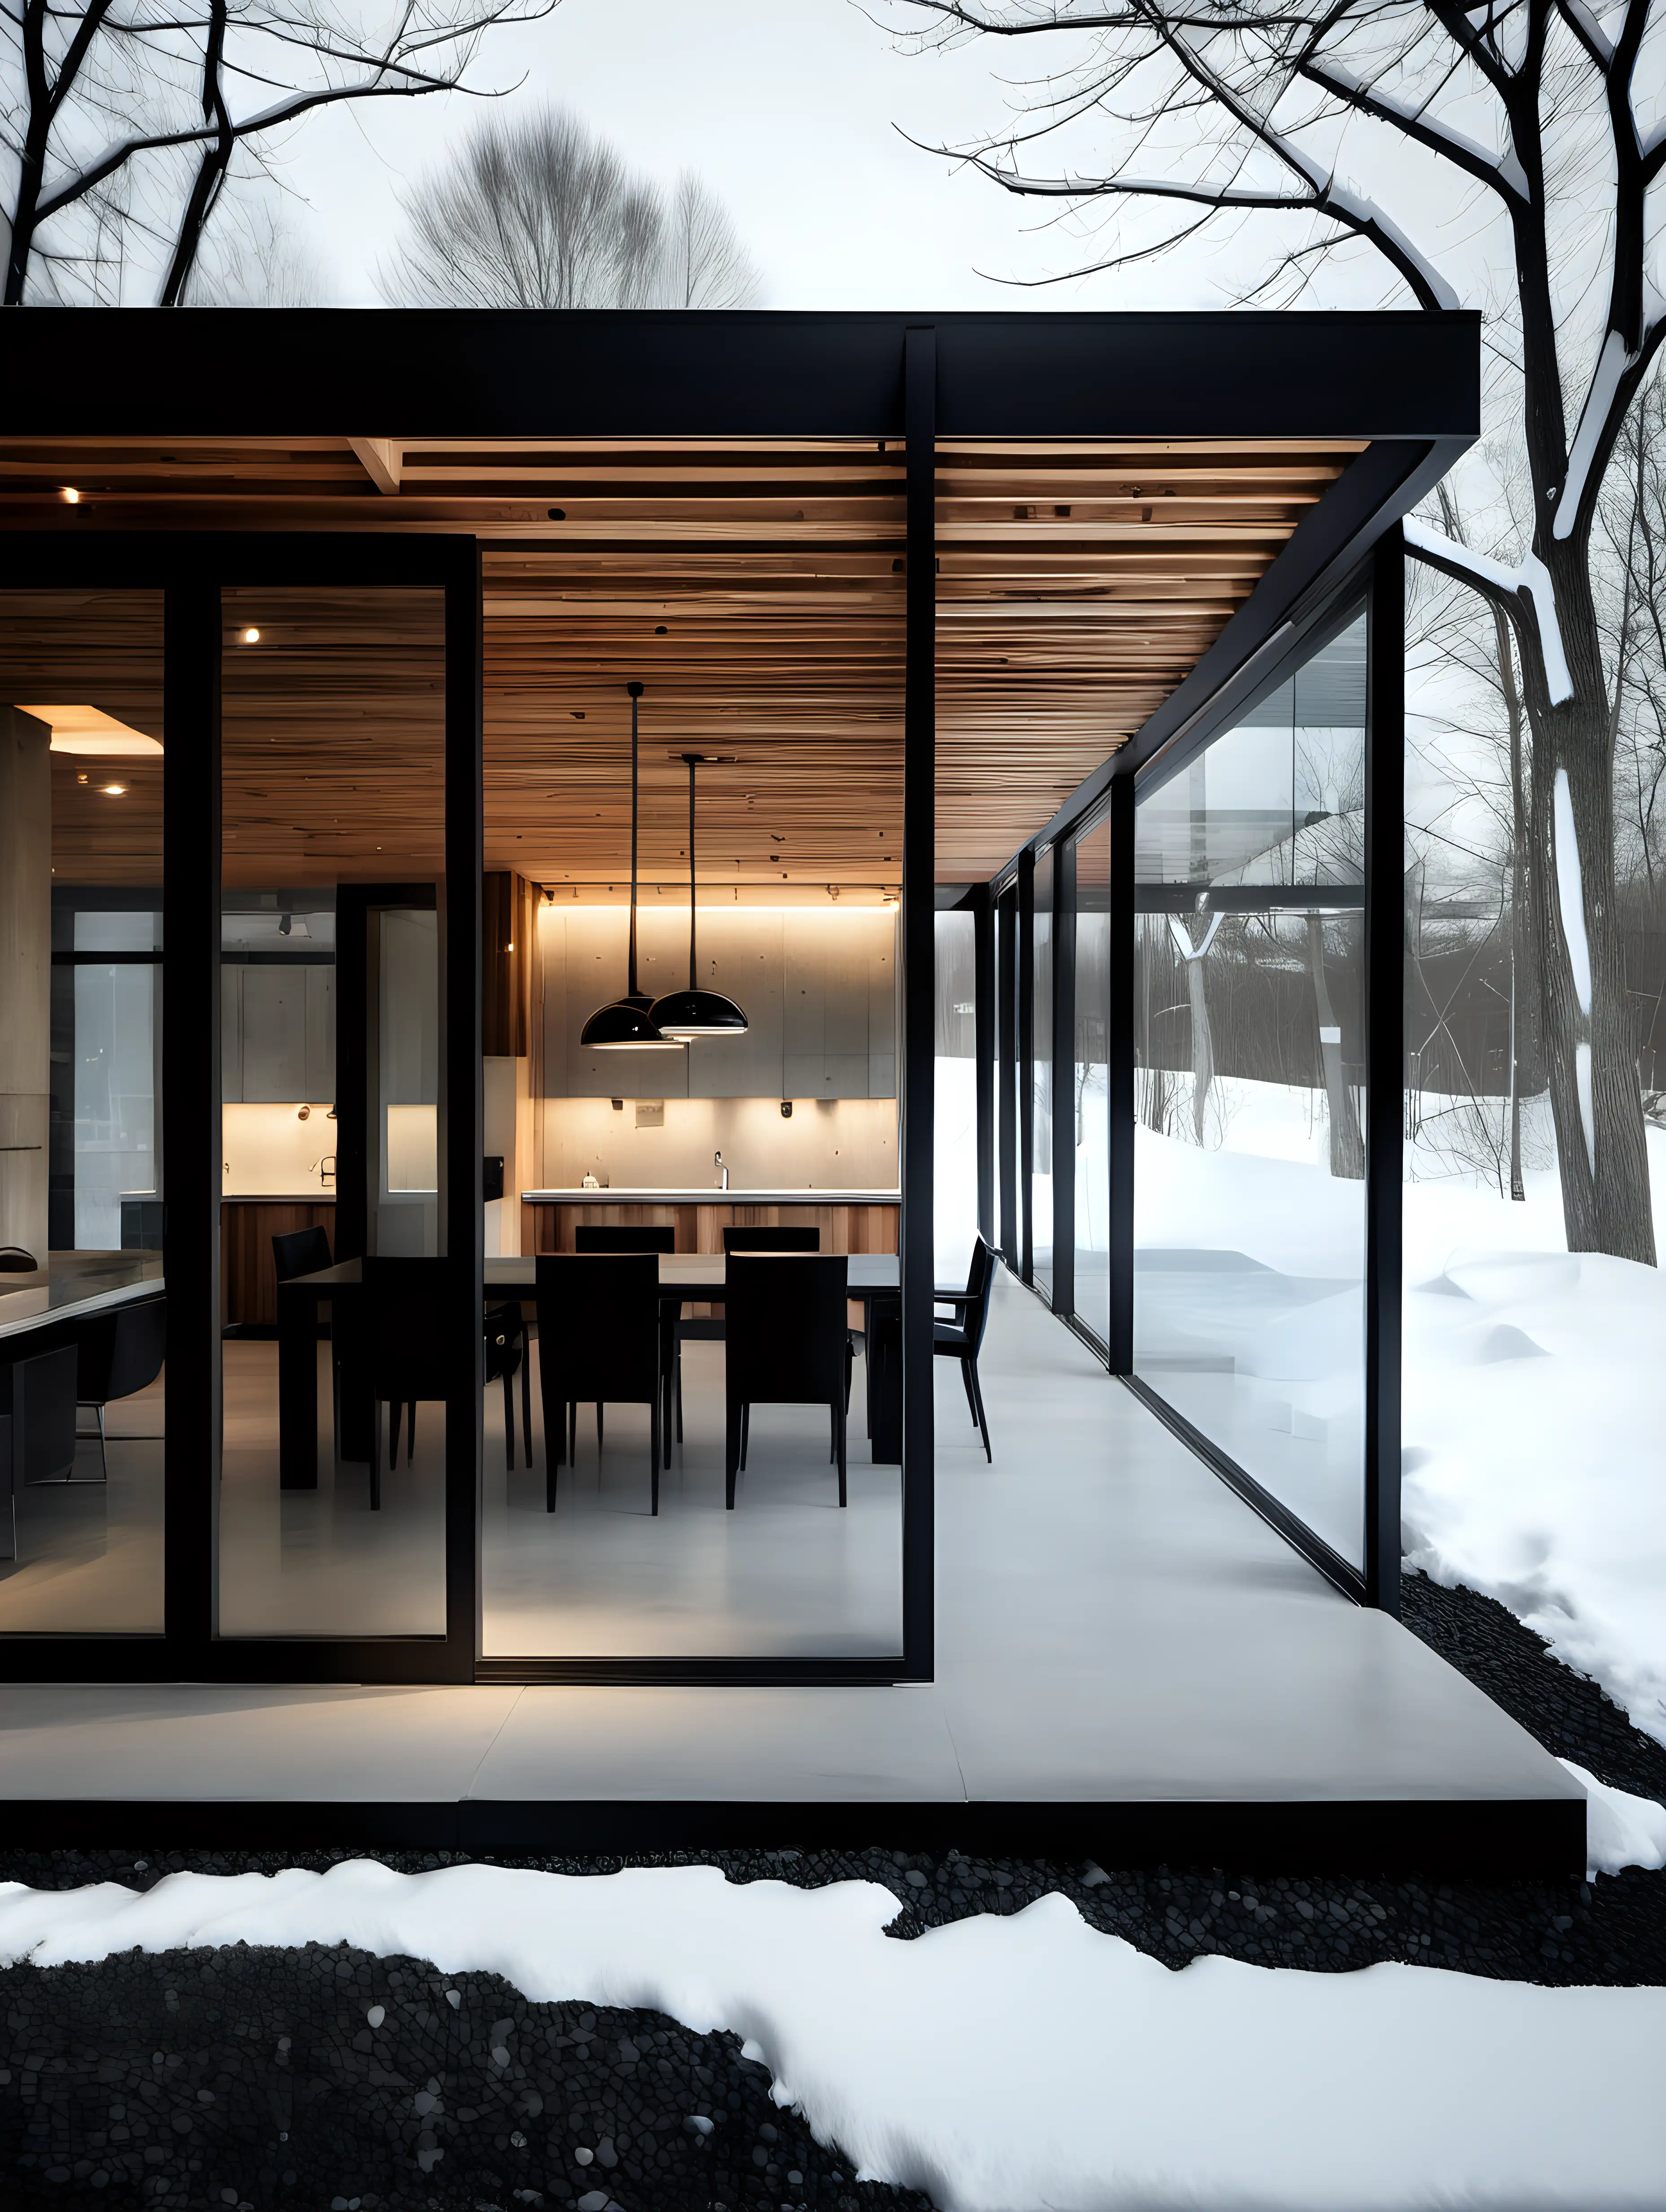 Modern Glass Pavilions Amidst Winter Landscape Contemporary Architecture with Romantic Touch